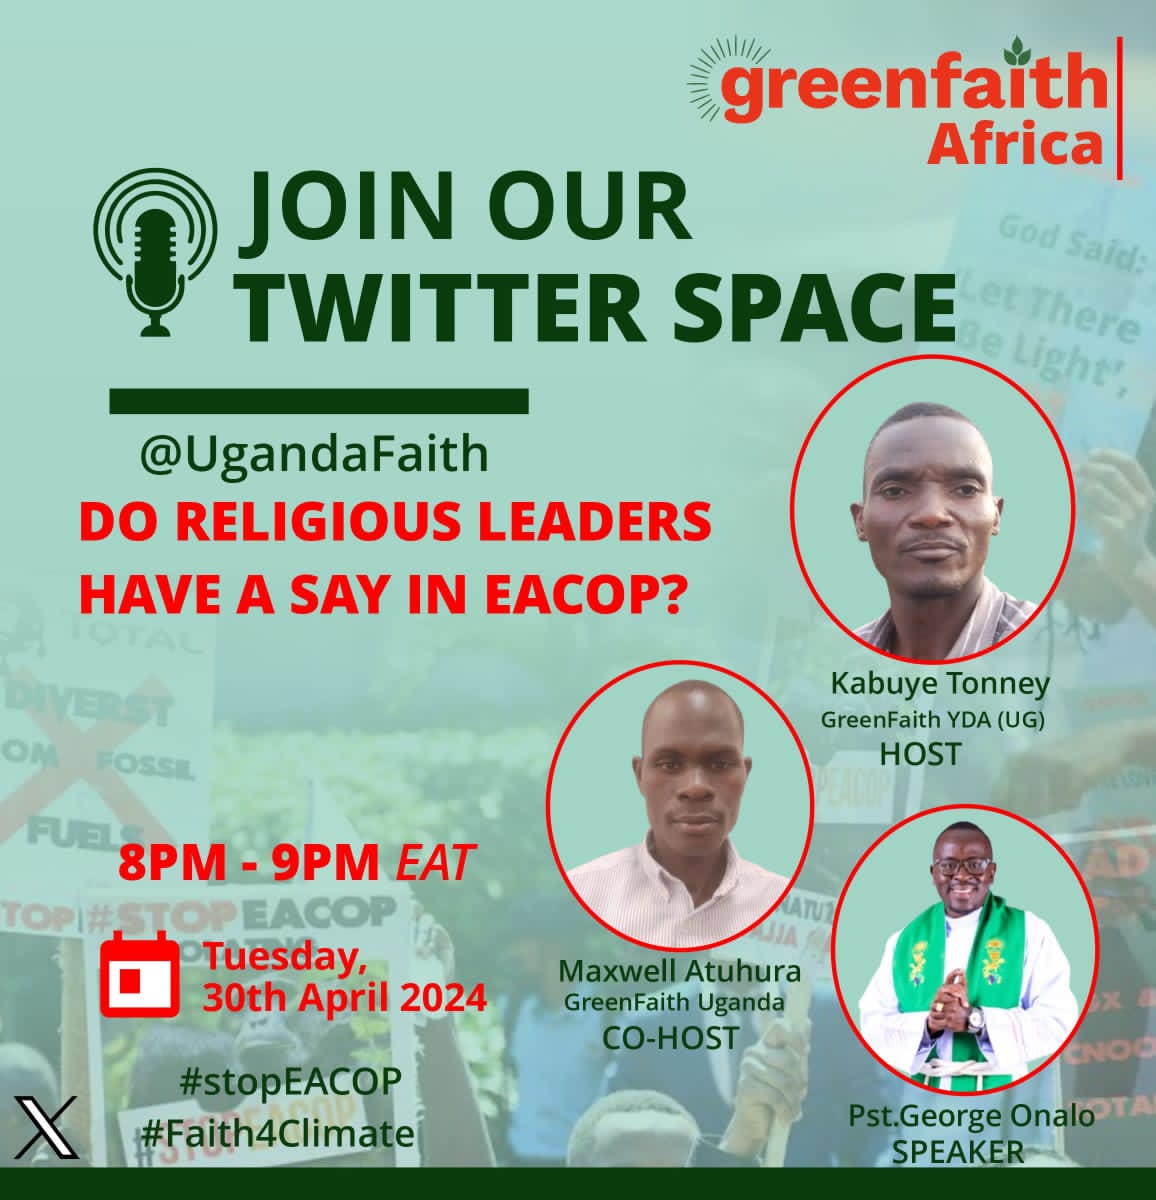 Don't miss this conversation!!! Title: Do Religious Leaders Have a Say in EACOP Date: 30th April 2024 Time: 8:00 PM (E.A.T) Space: @UgandaFaith #StopEACOP #Faiths4Climate @GreenFaith_Afr @greenfaithworld @KTonney88246